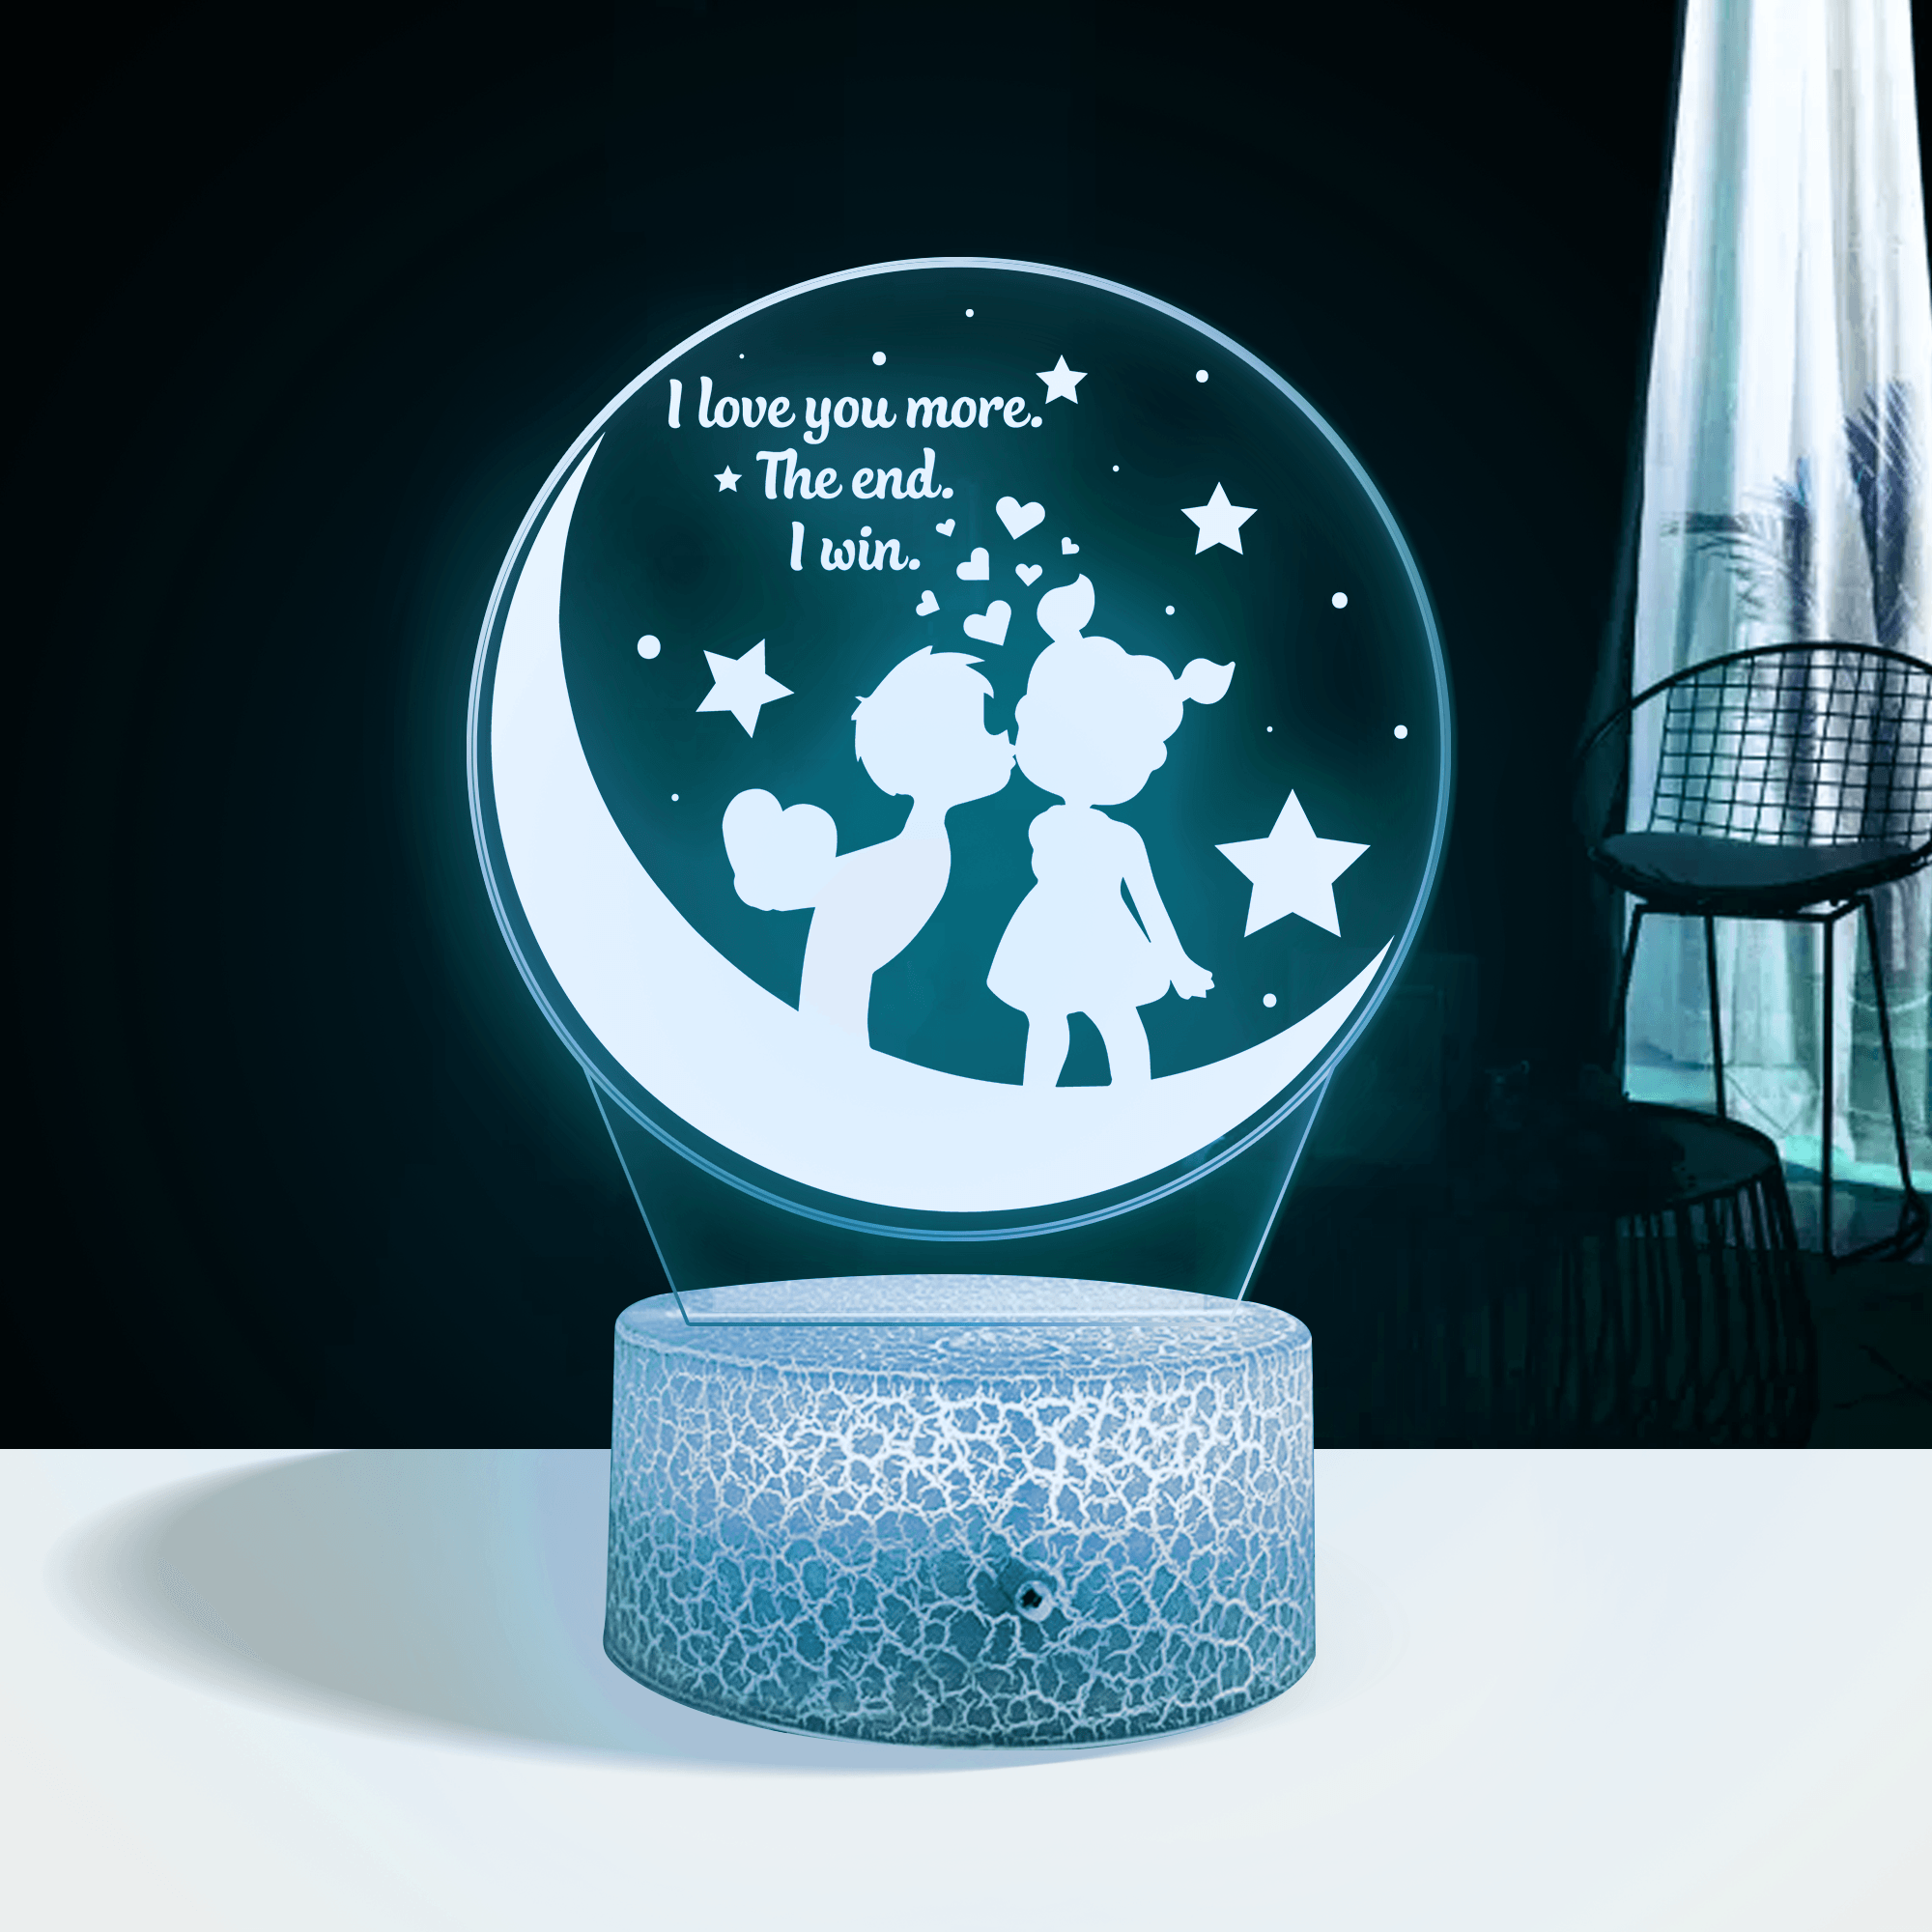 3D Led Light - Family - To My Soulmate - I Love You More - Auglca13012 - Gifts Holder